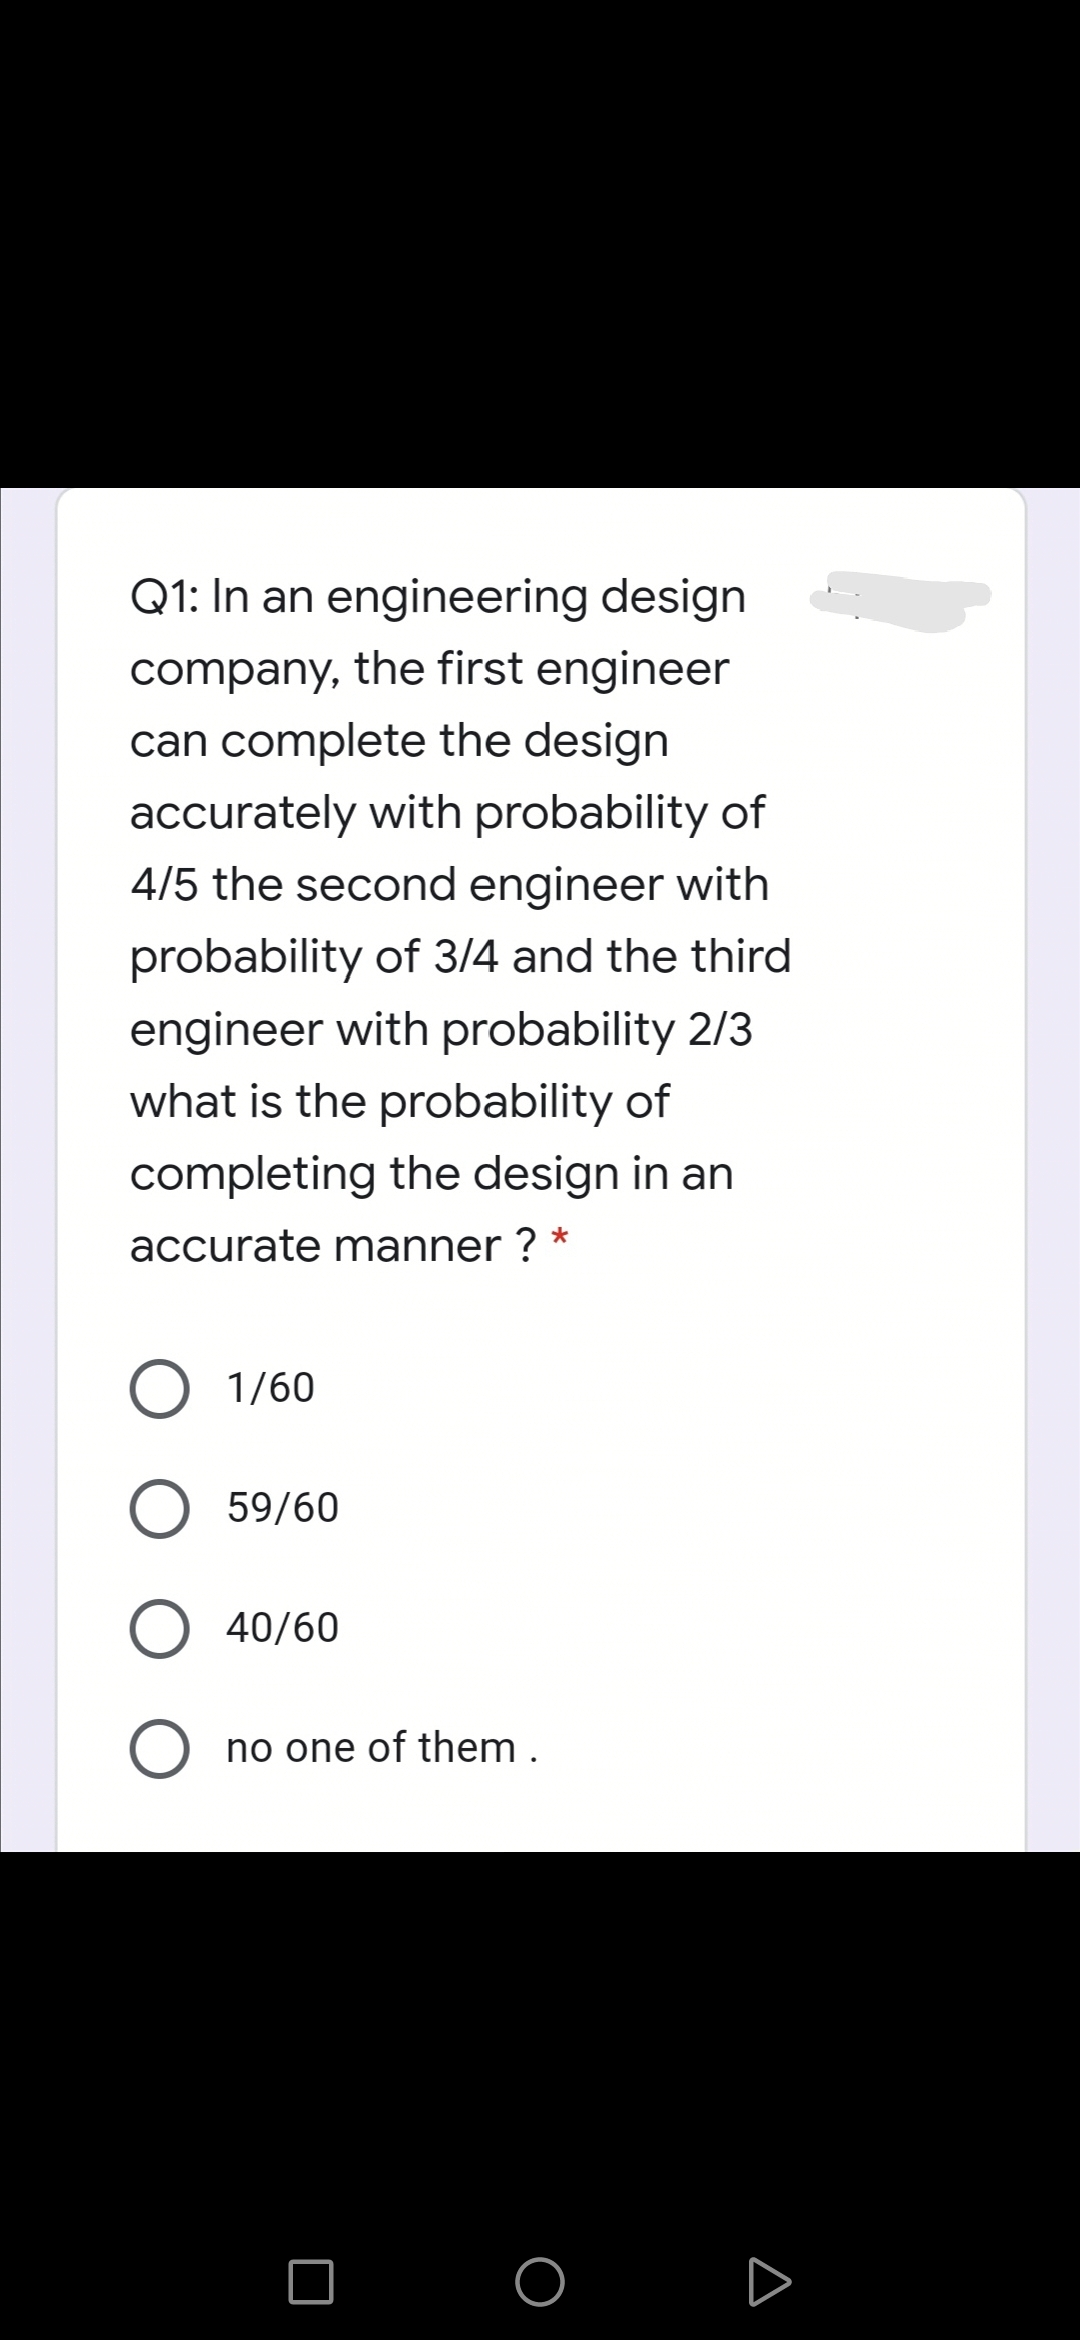 Q1: In an engineering design
company, the first engineer
can complete the design
accurately with probability of
4/5 the second engineer with
probability of 3/4 and the third
engineer with probability 2/3
what is the probability of
completing the design in an
accurate manner ? *
1/60
59/60
40/60
O no one of them .
O O D
